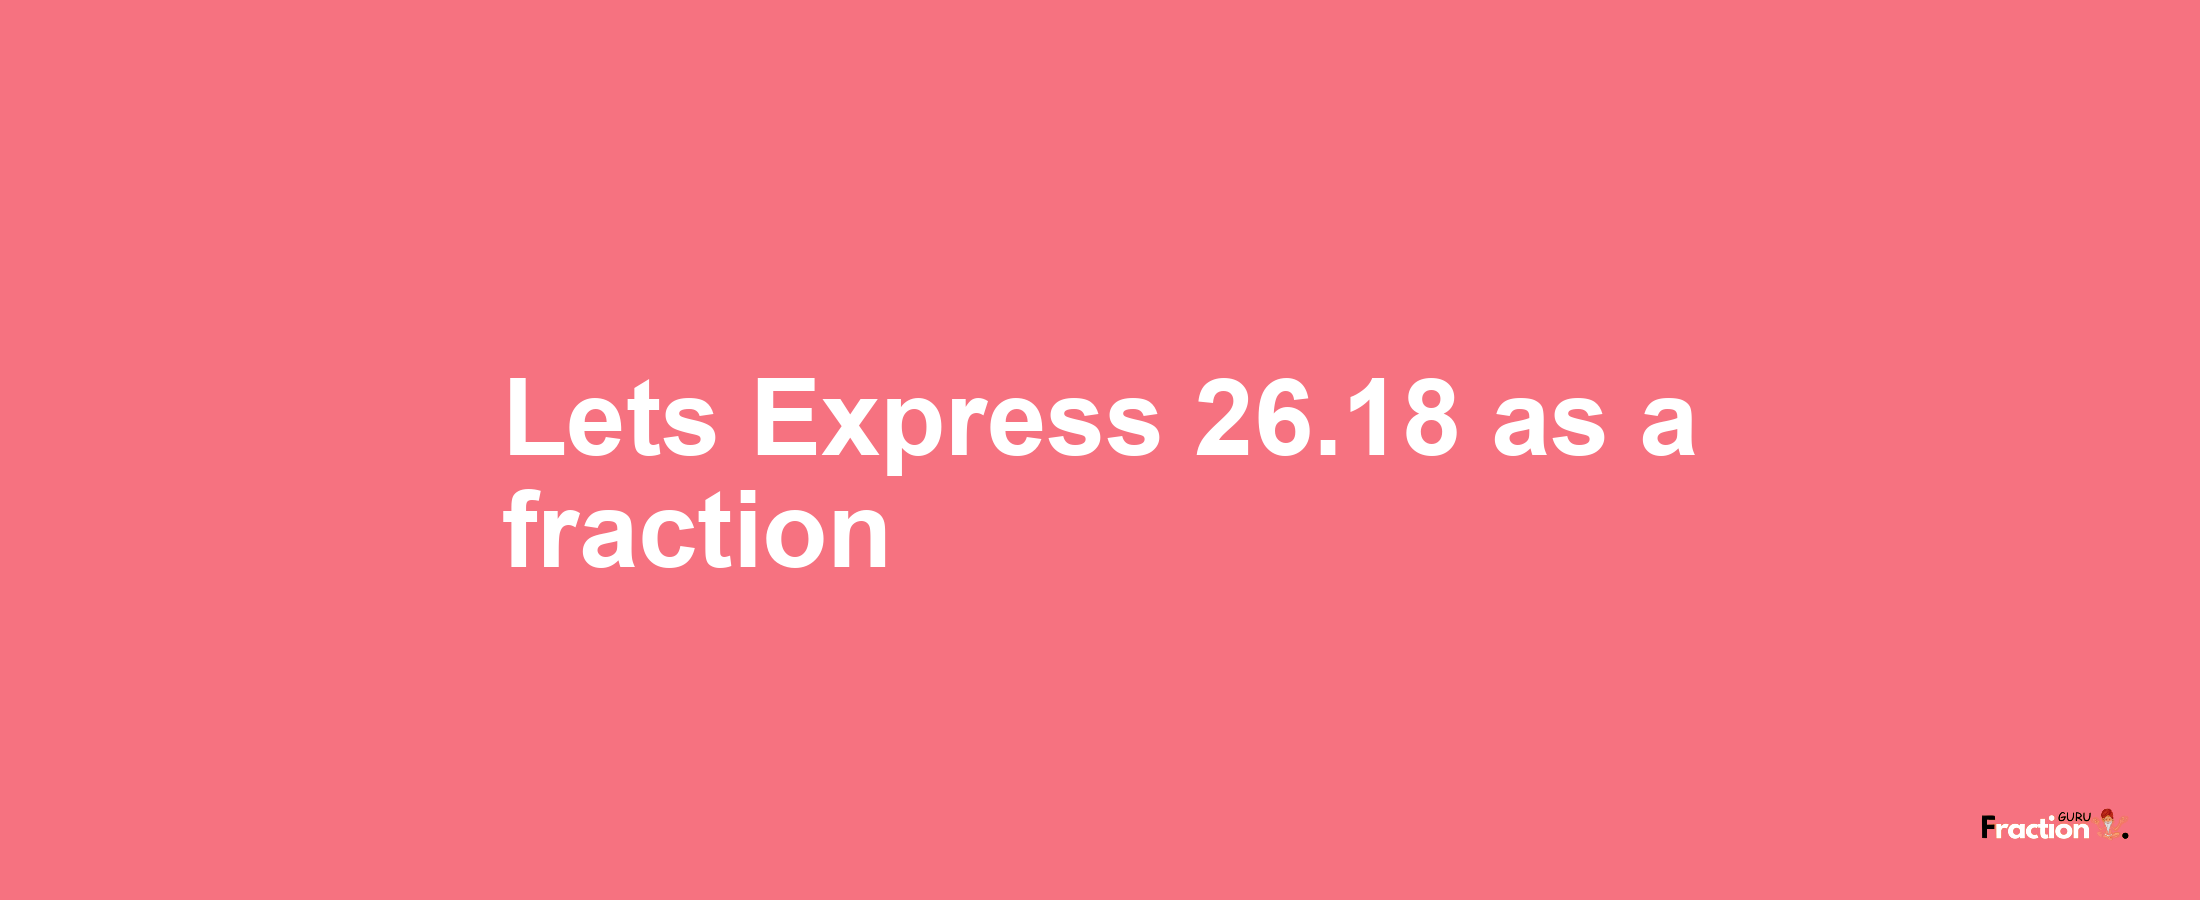 Lets Express 26.18 as afraction